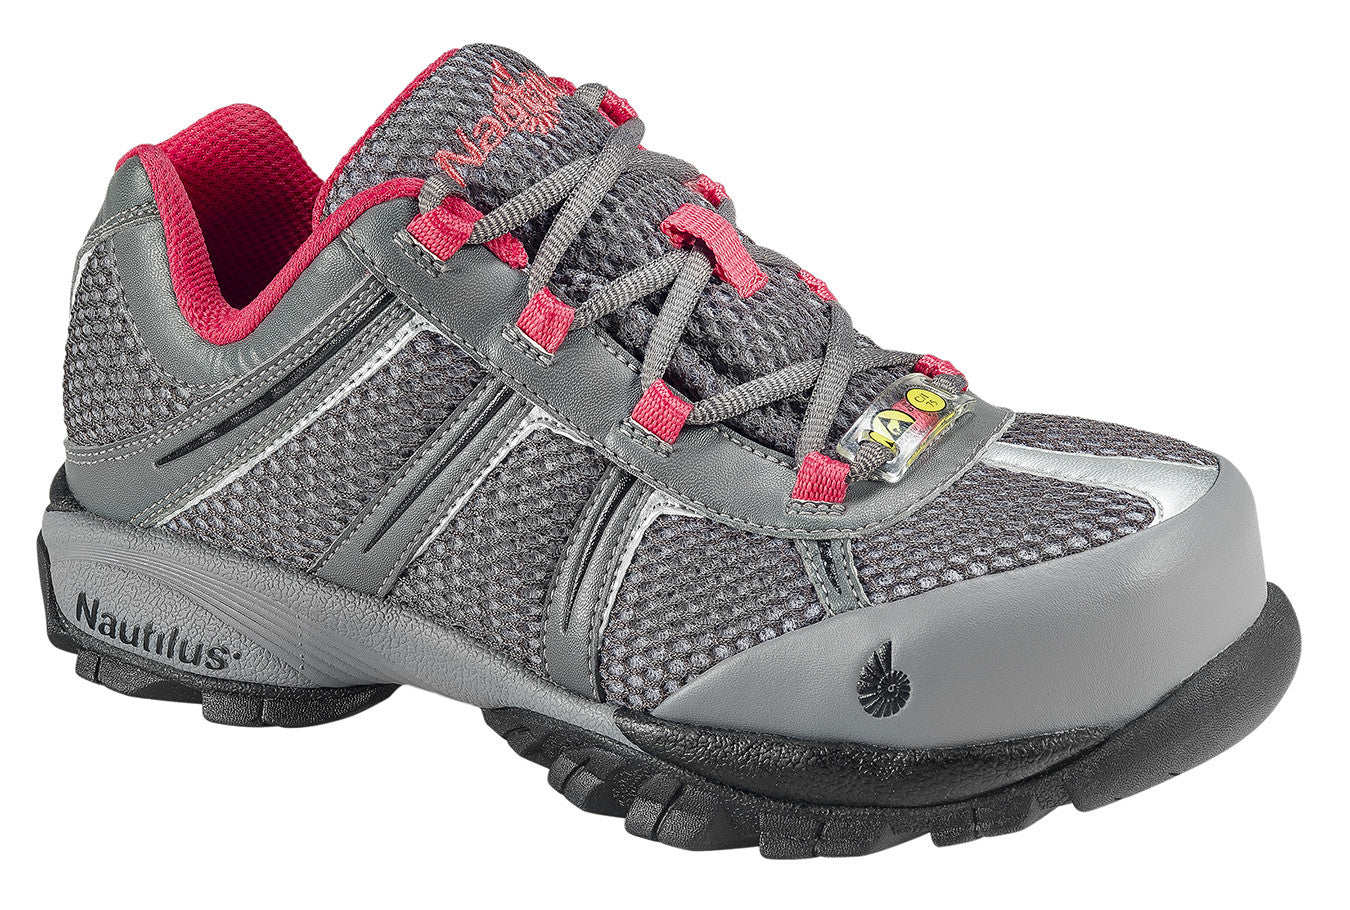 Women's ESD No Exposed Metal Safety Toe Athletic